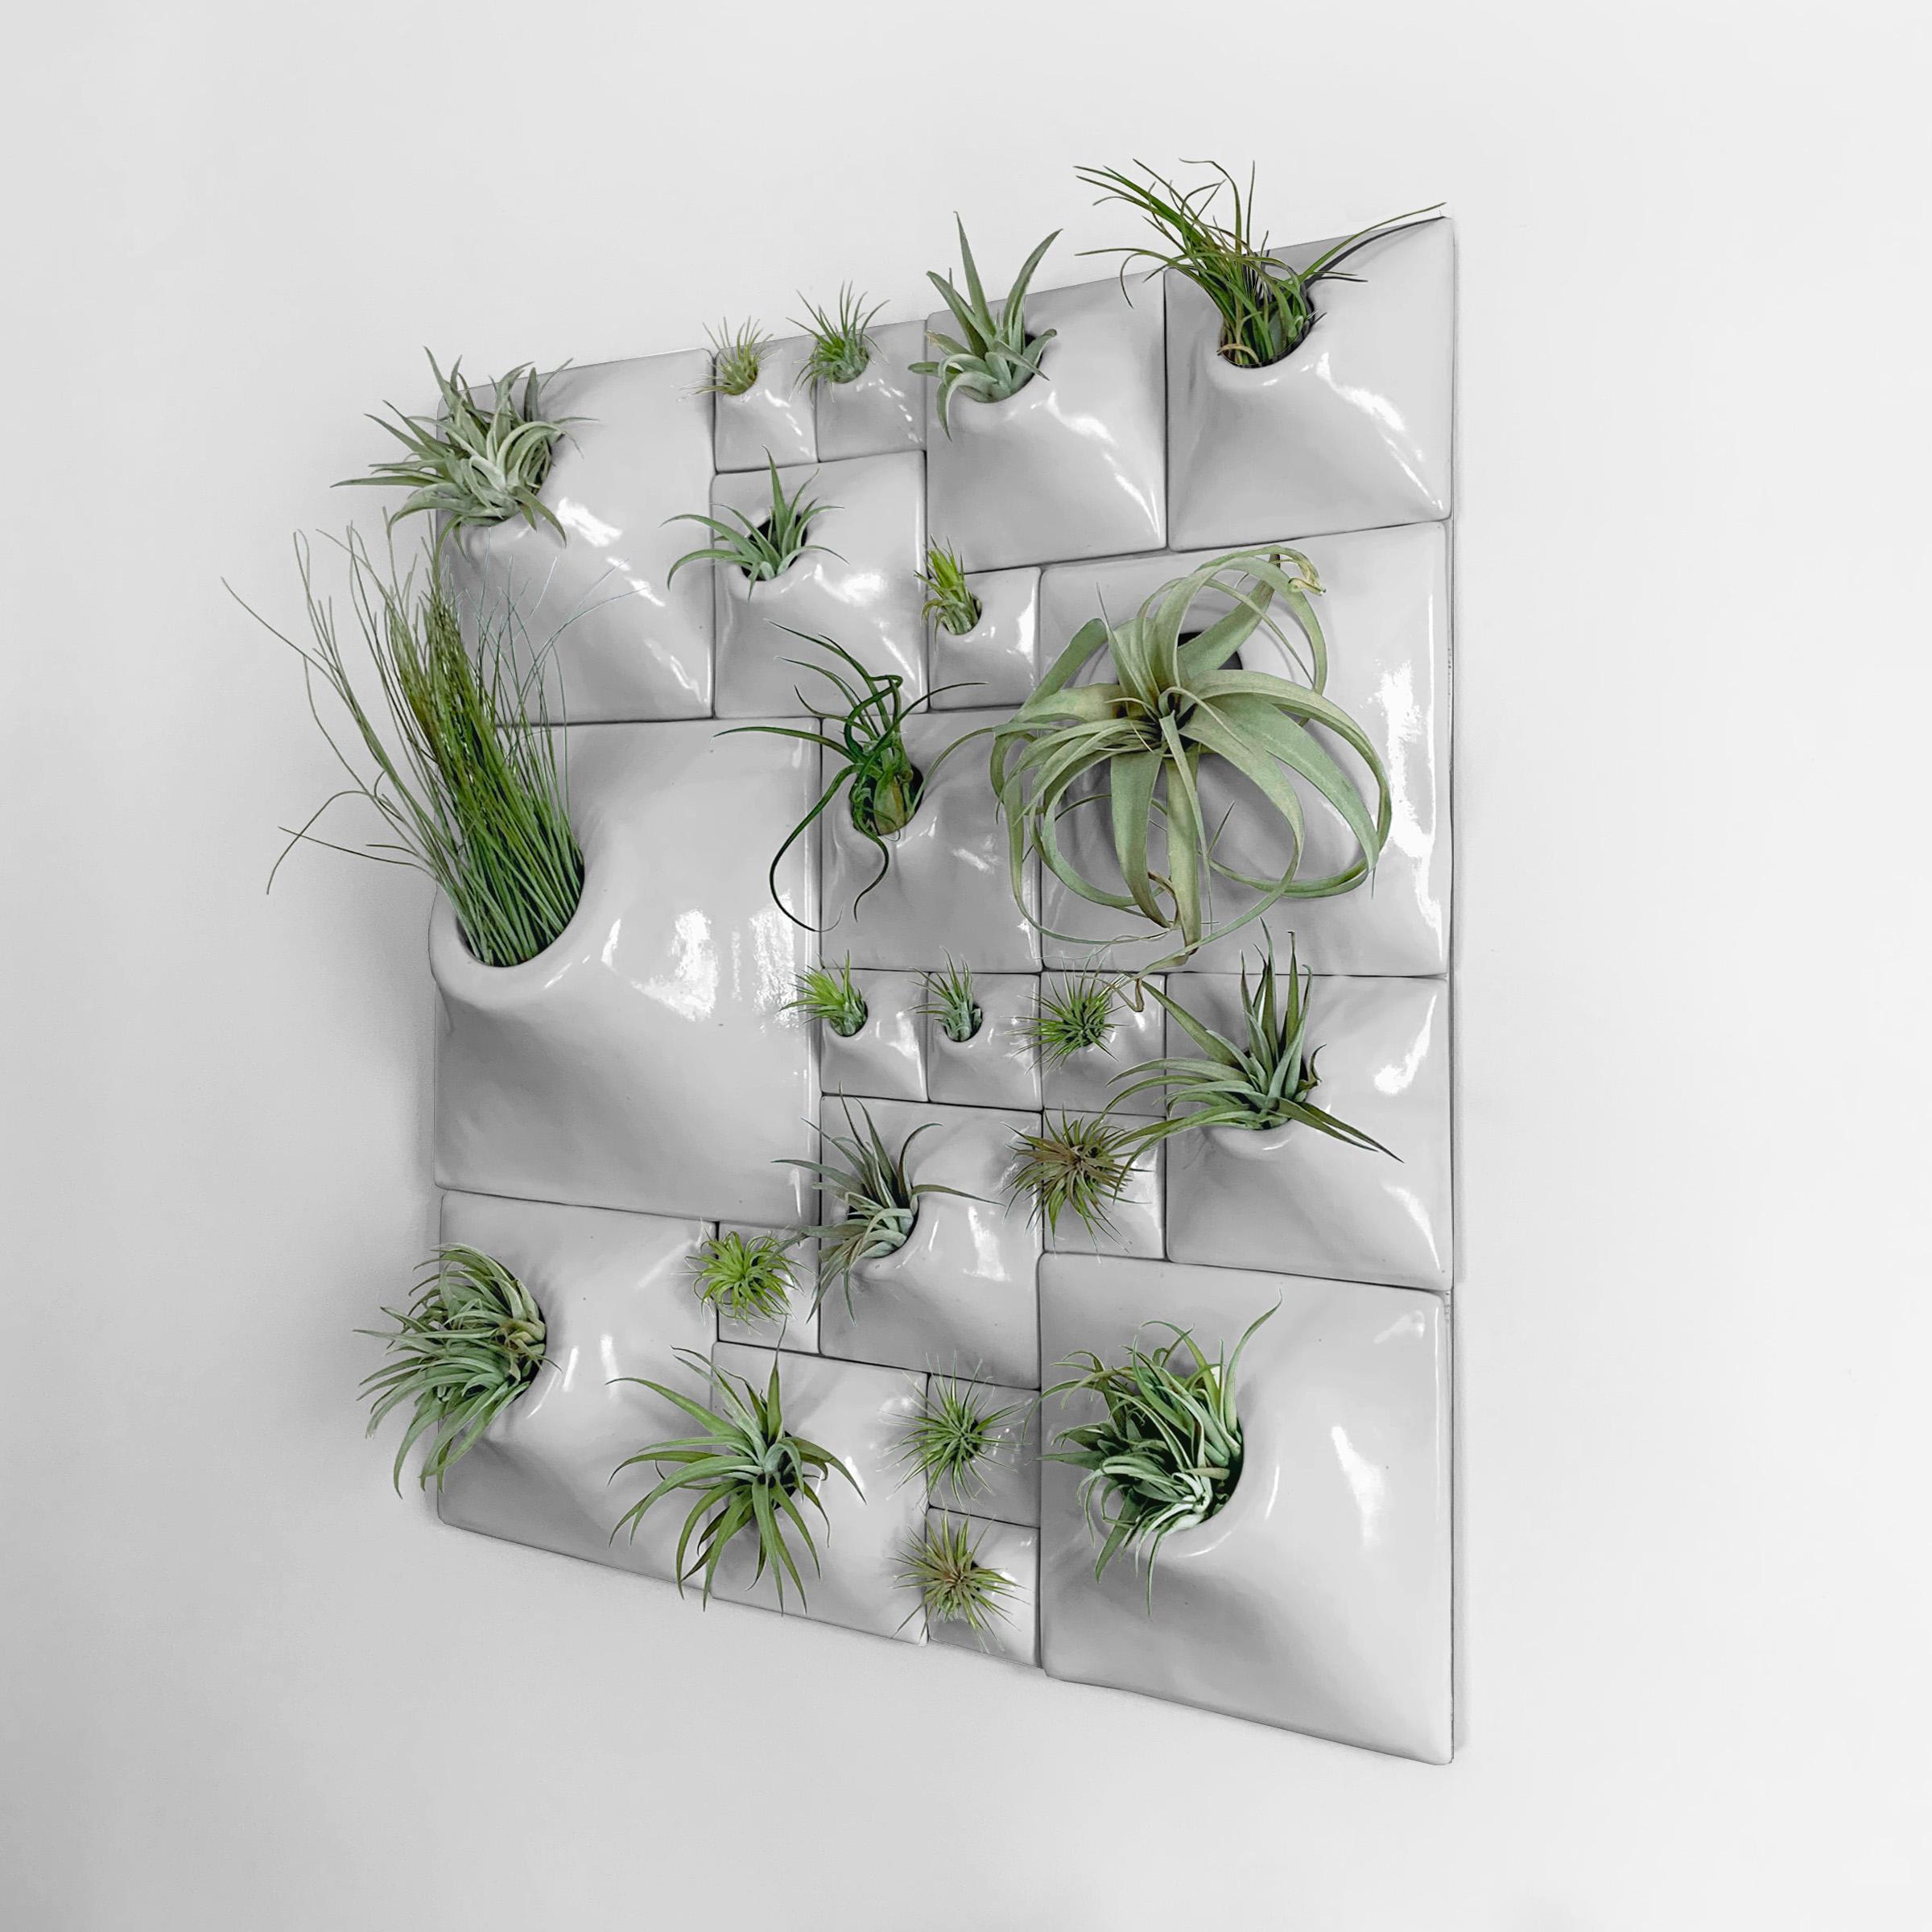 Modern Wall Sculpture, Biophilic Wall Art, Living Wall Decor, Moss Wall Planter In New Condition For Sale In Bridgeport, PA